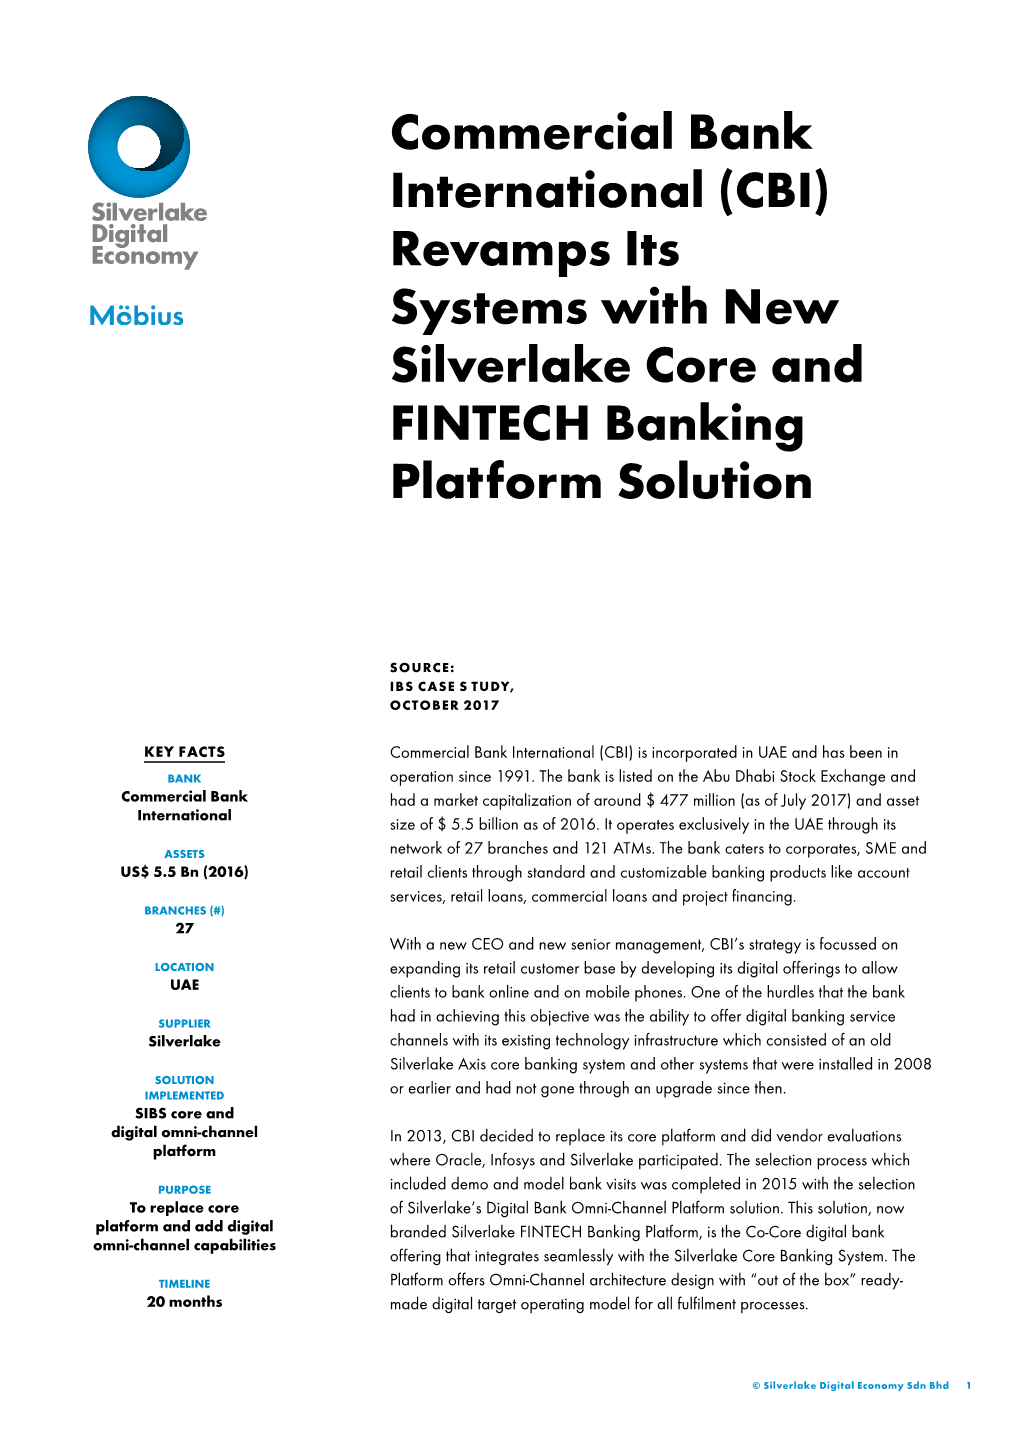 (CBI) Revamps Its Systems with New Silverlake Core and FINTECH Banking Platform Solution